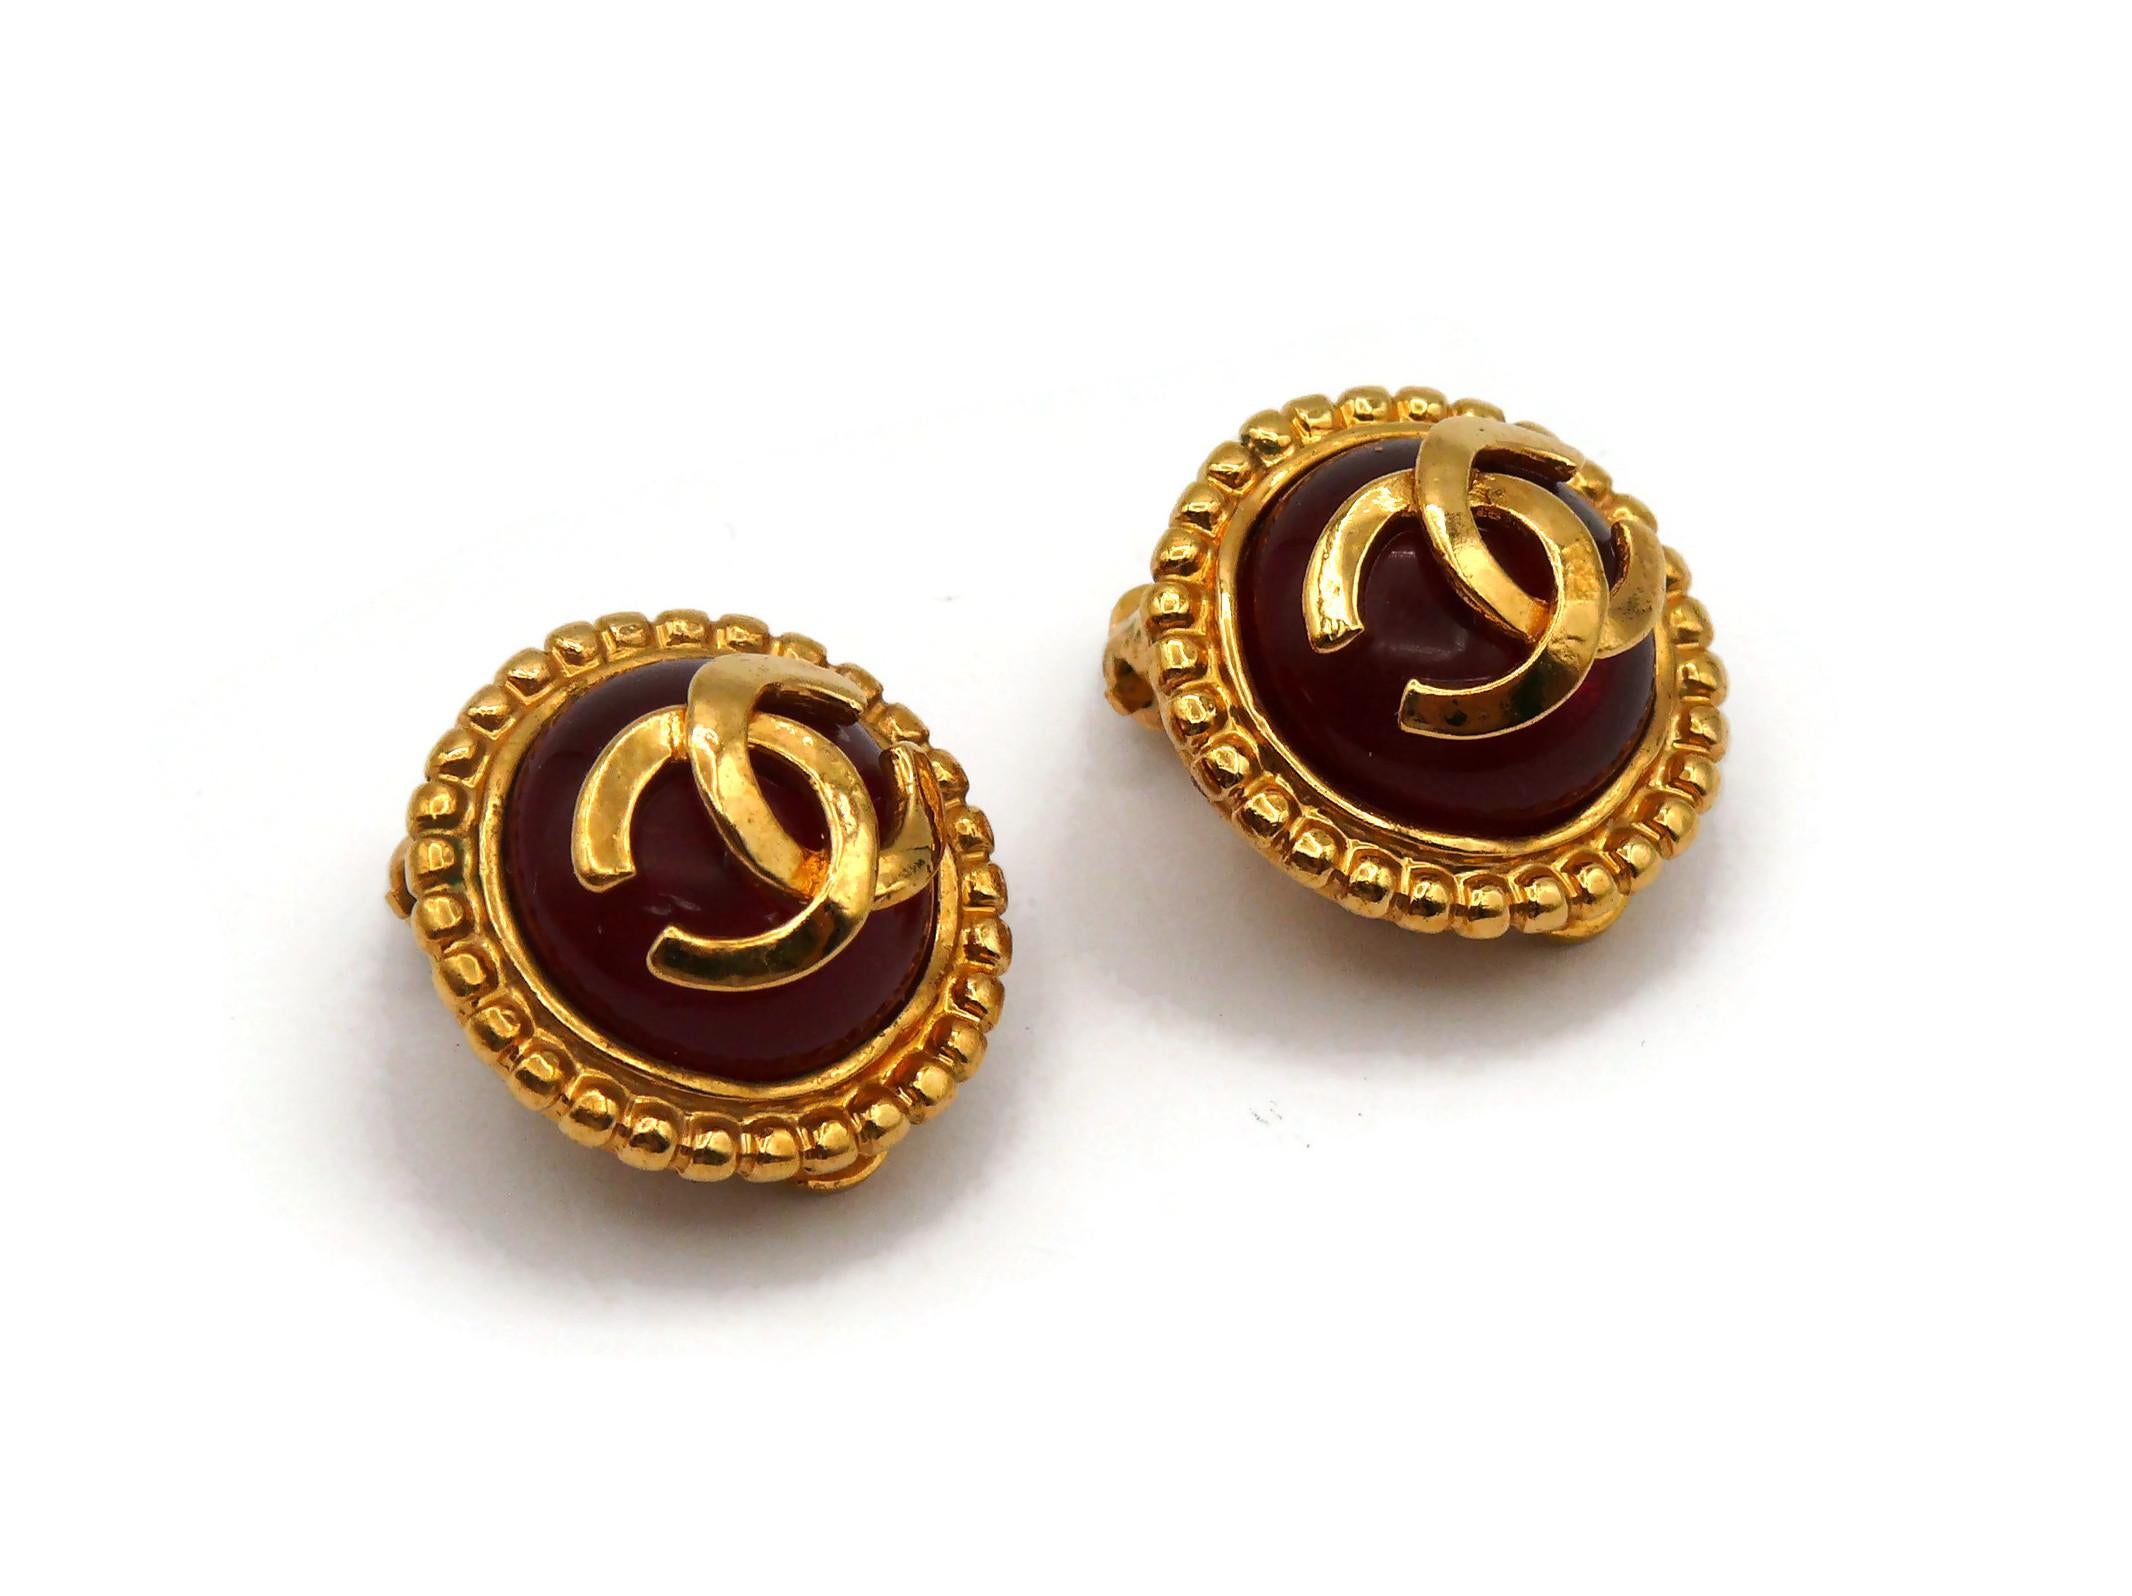 CHANEL by KARL LAGERFELD Vintage Gripoix CC Clip-On Earrings, 1997 For Sale 2